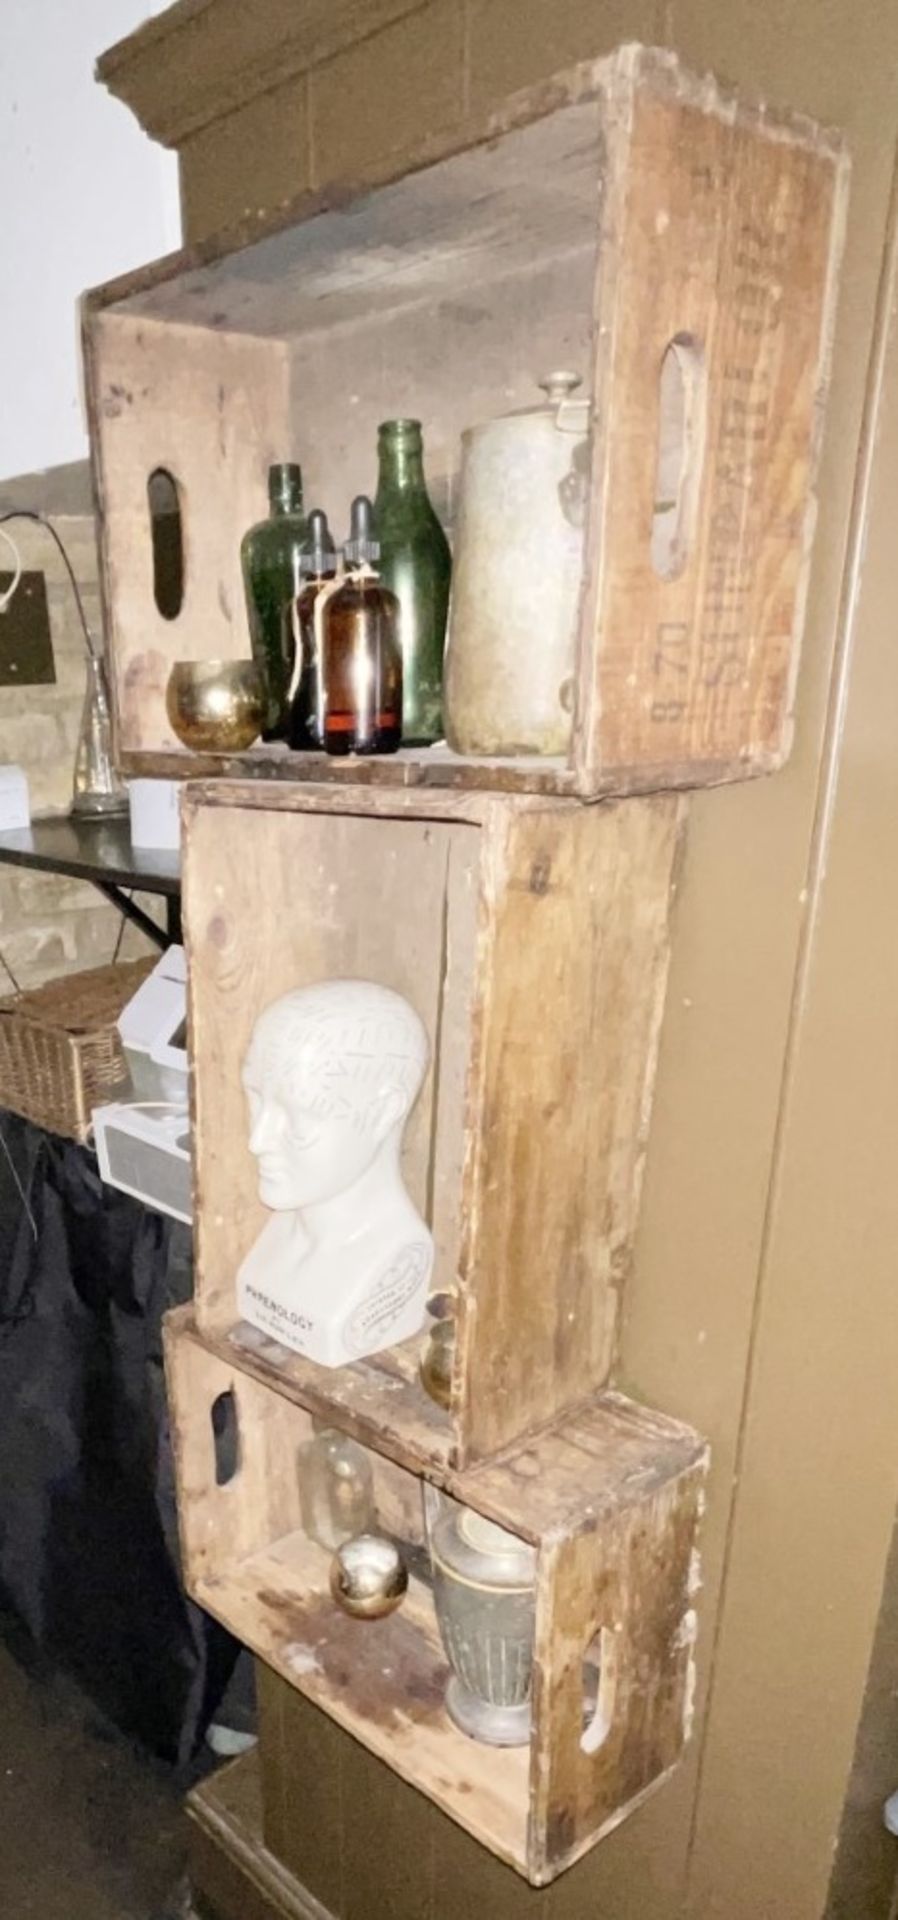 3 x Ford Branded Wall Mounted Soap Boxes and Vintage Contents Within Including Phrenology Bust - Image 6 of 6